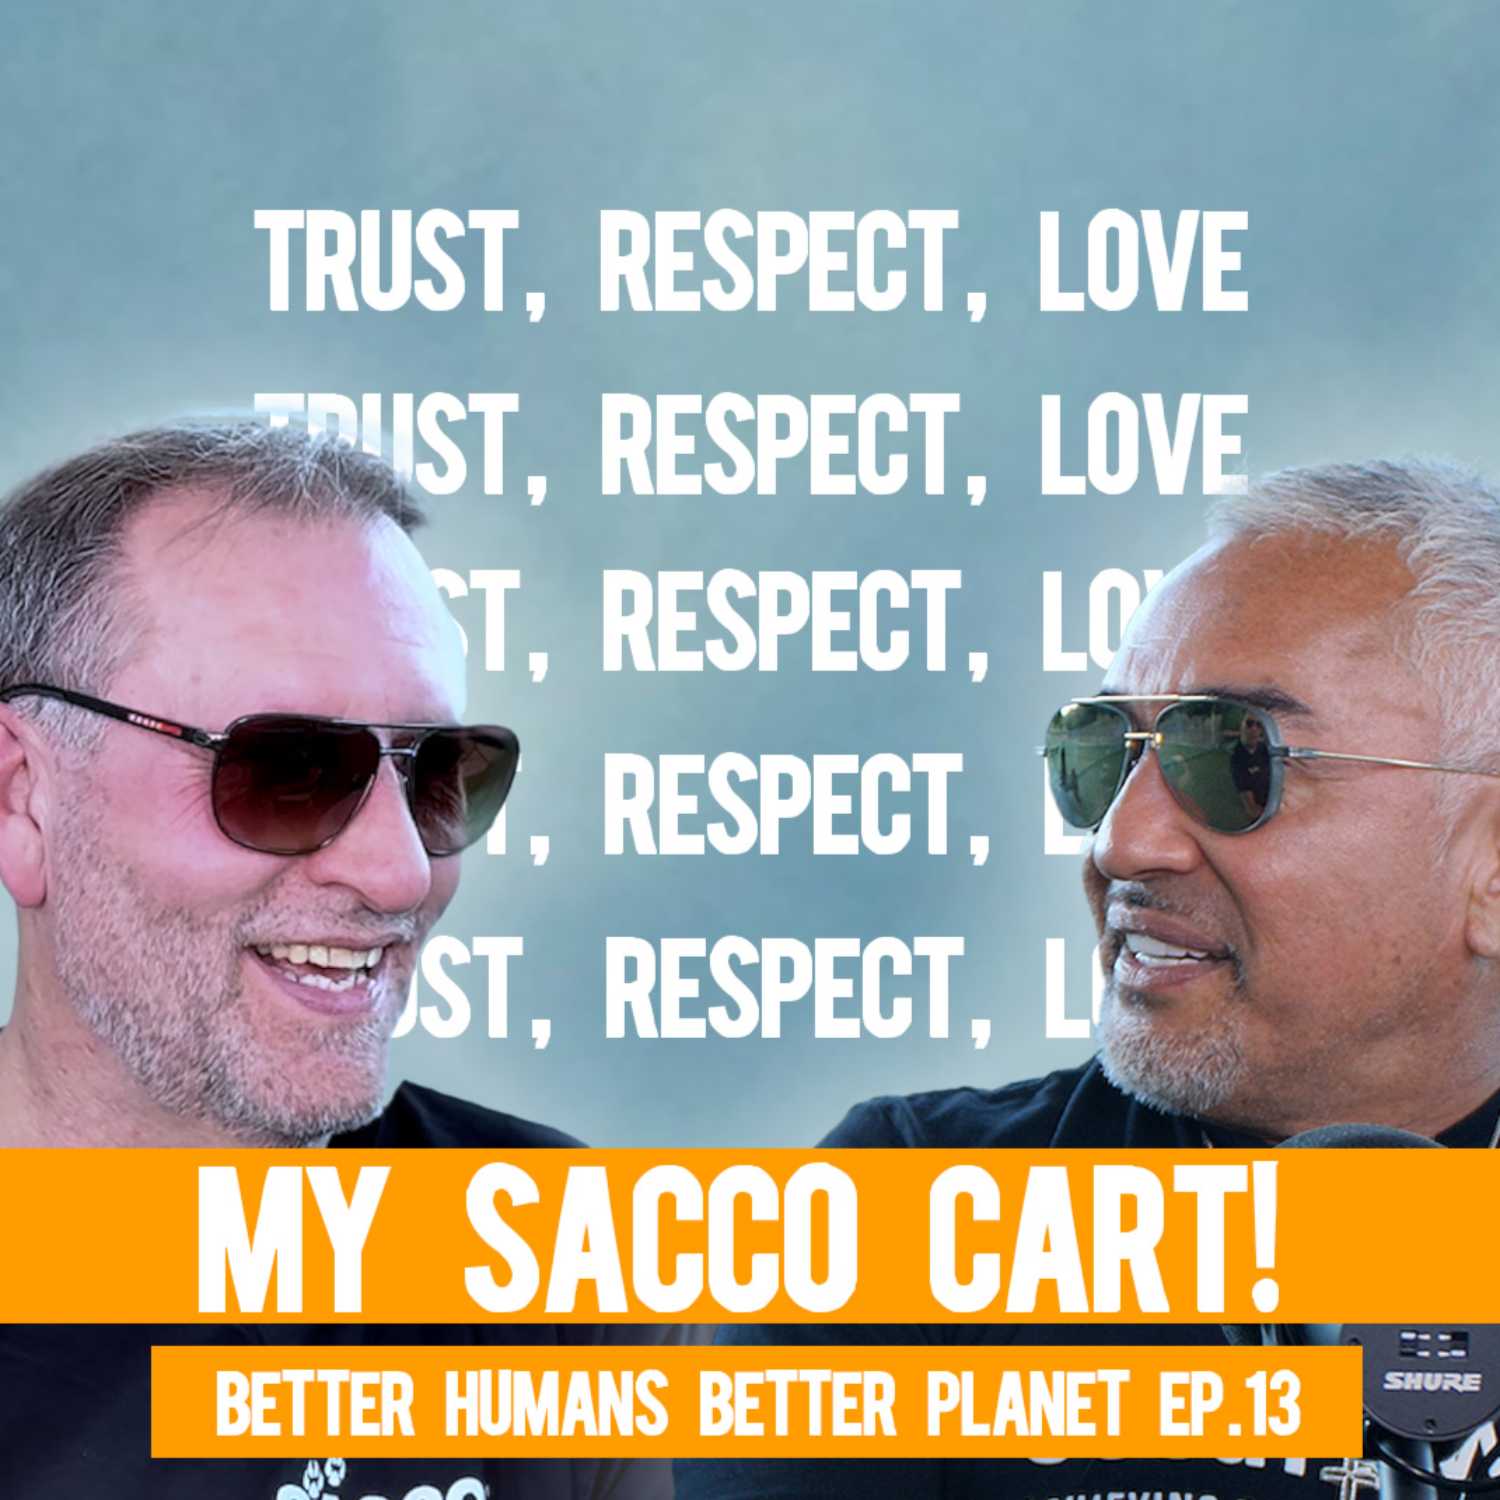 MY NEWEST PROJECT. The Cesar Millan Sacco Cart | Better Humans Better Planet EP13